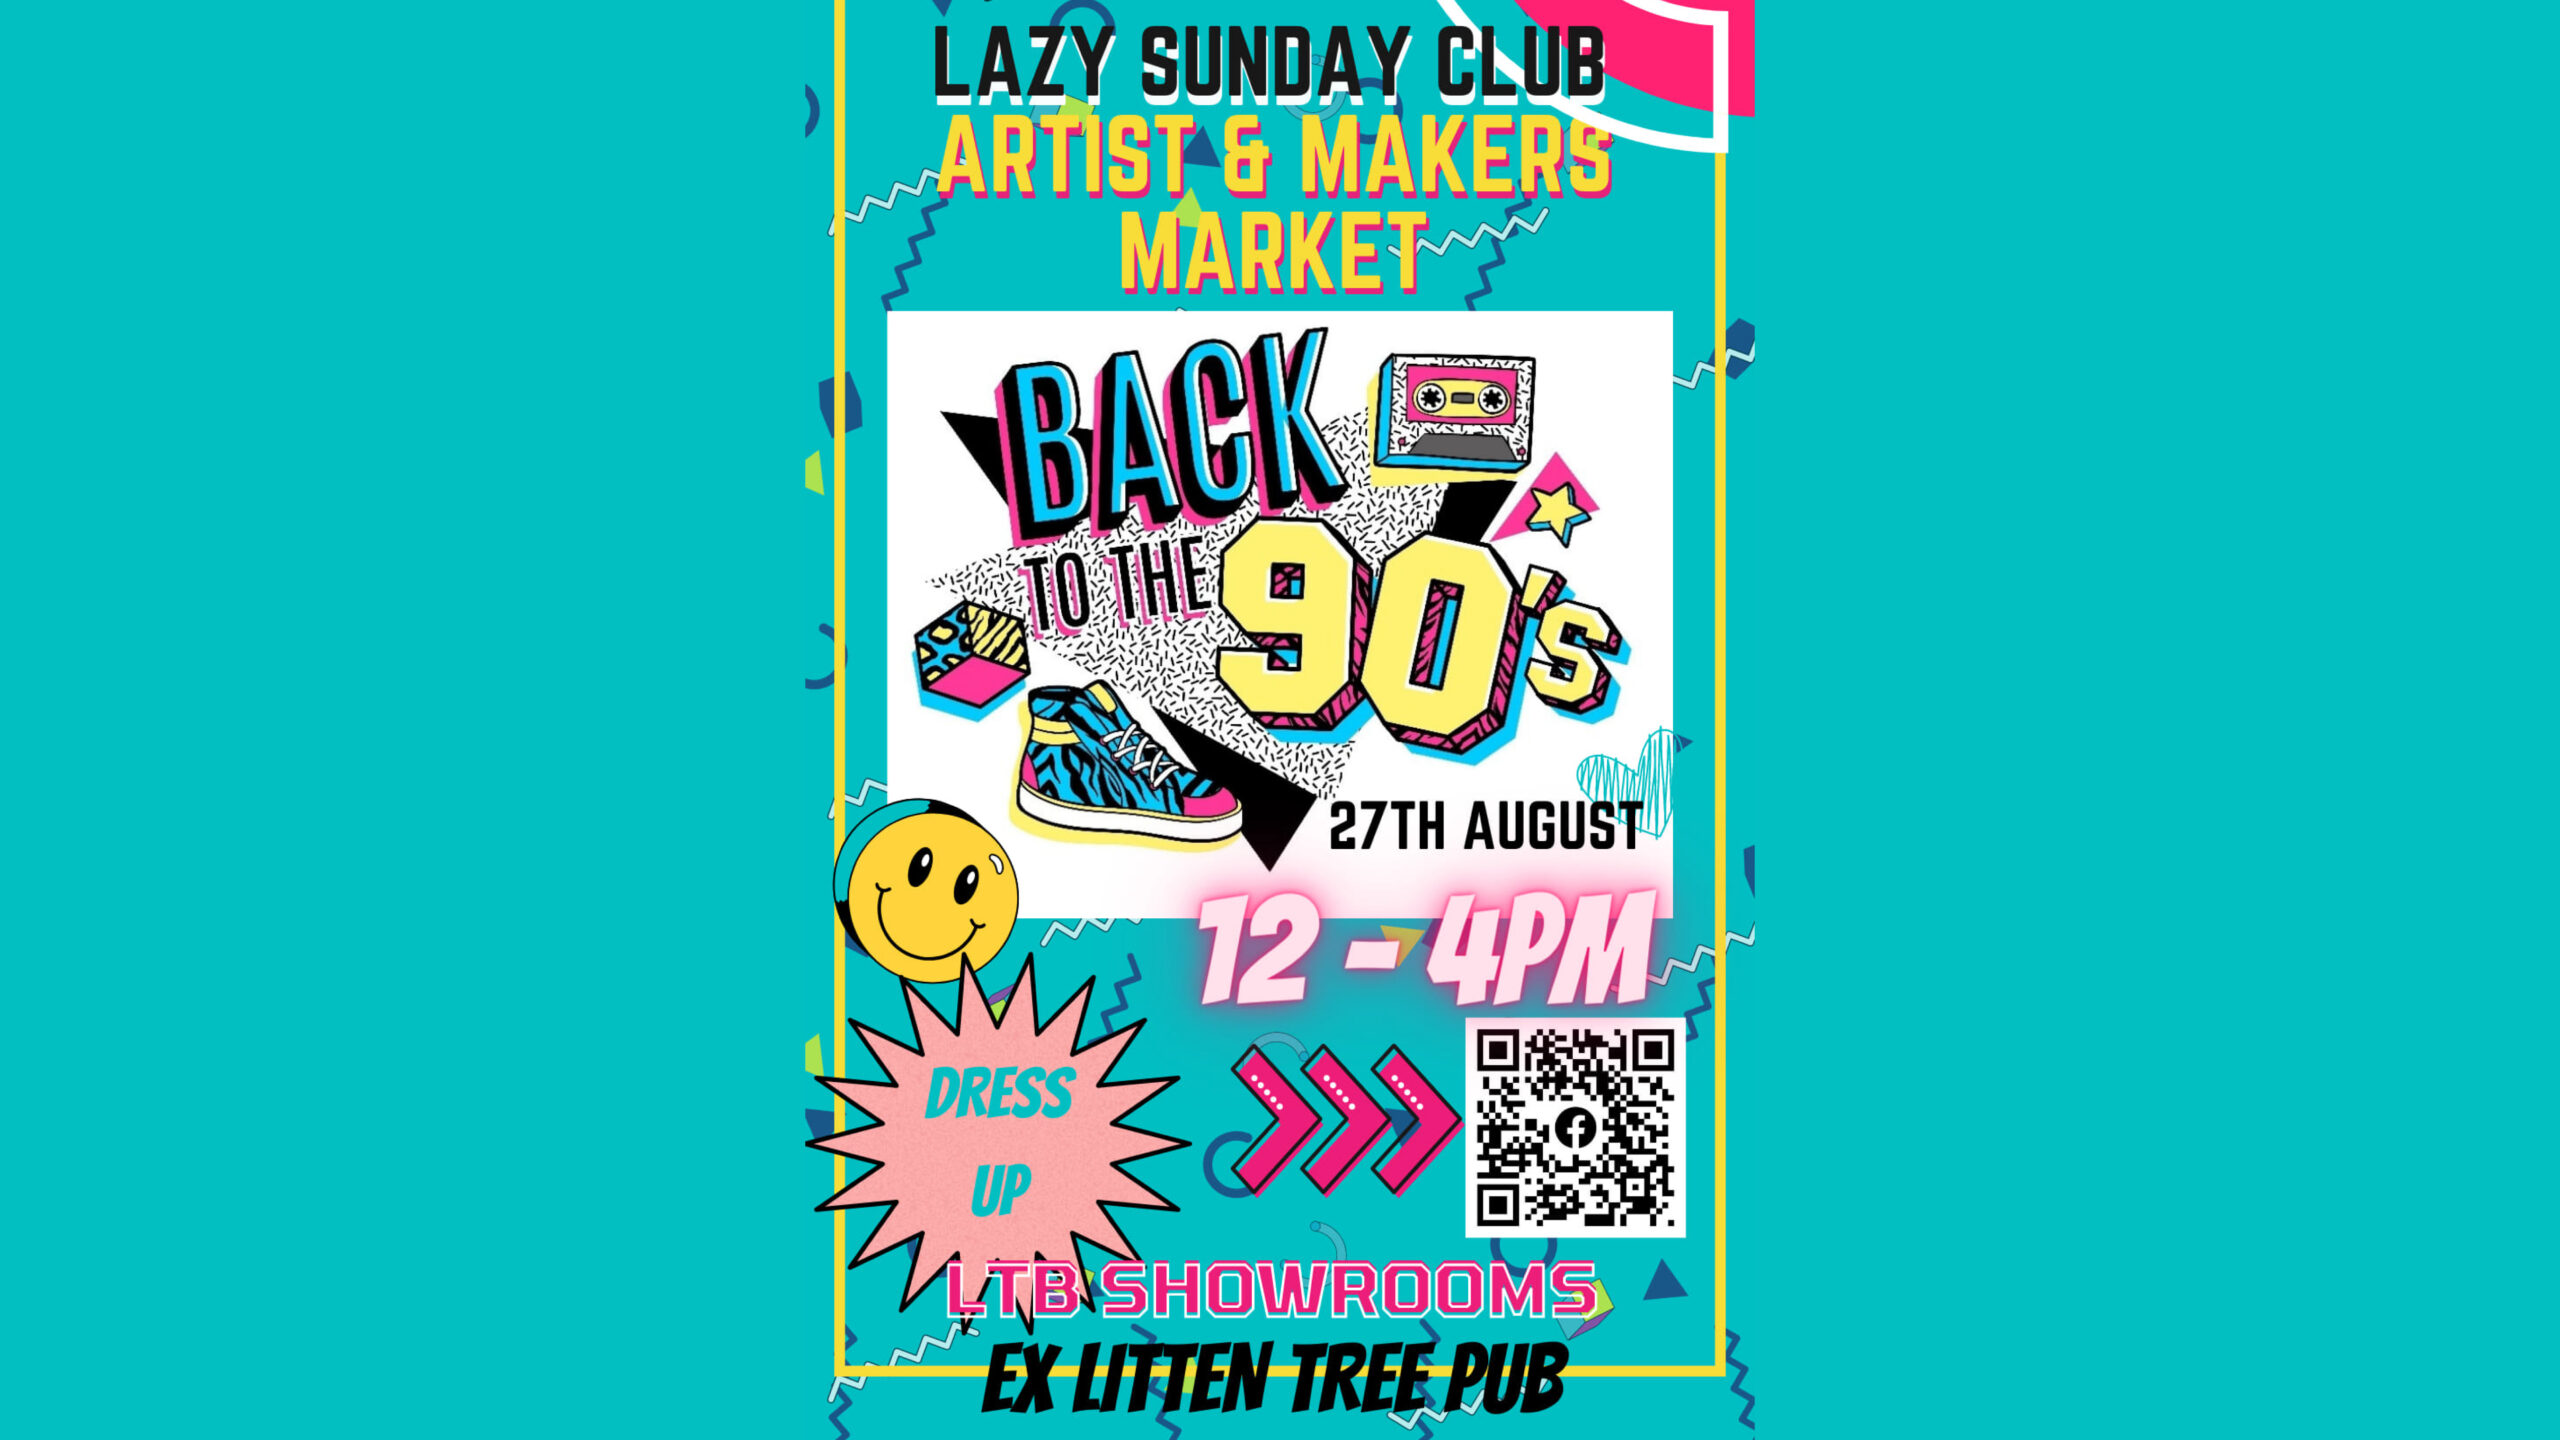 Back to the 90s on Sunday 27th August.